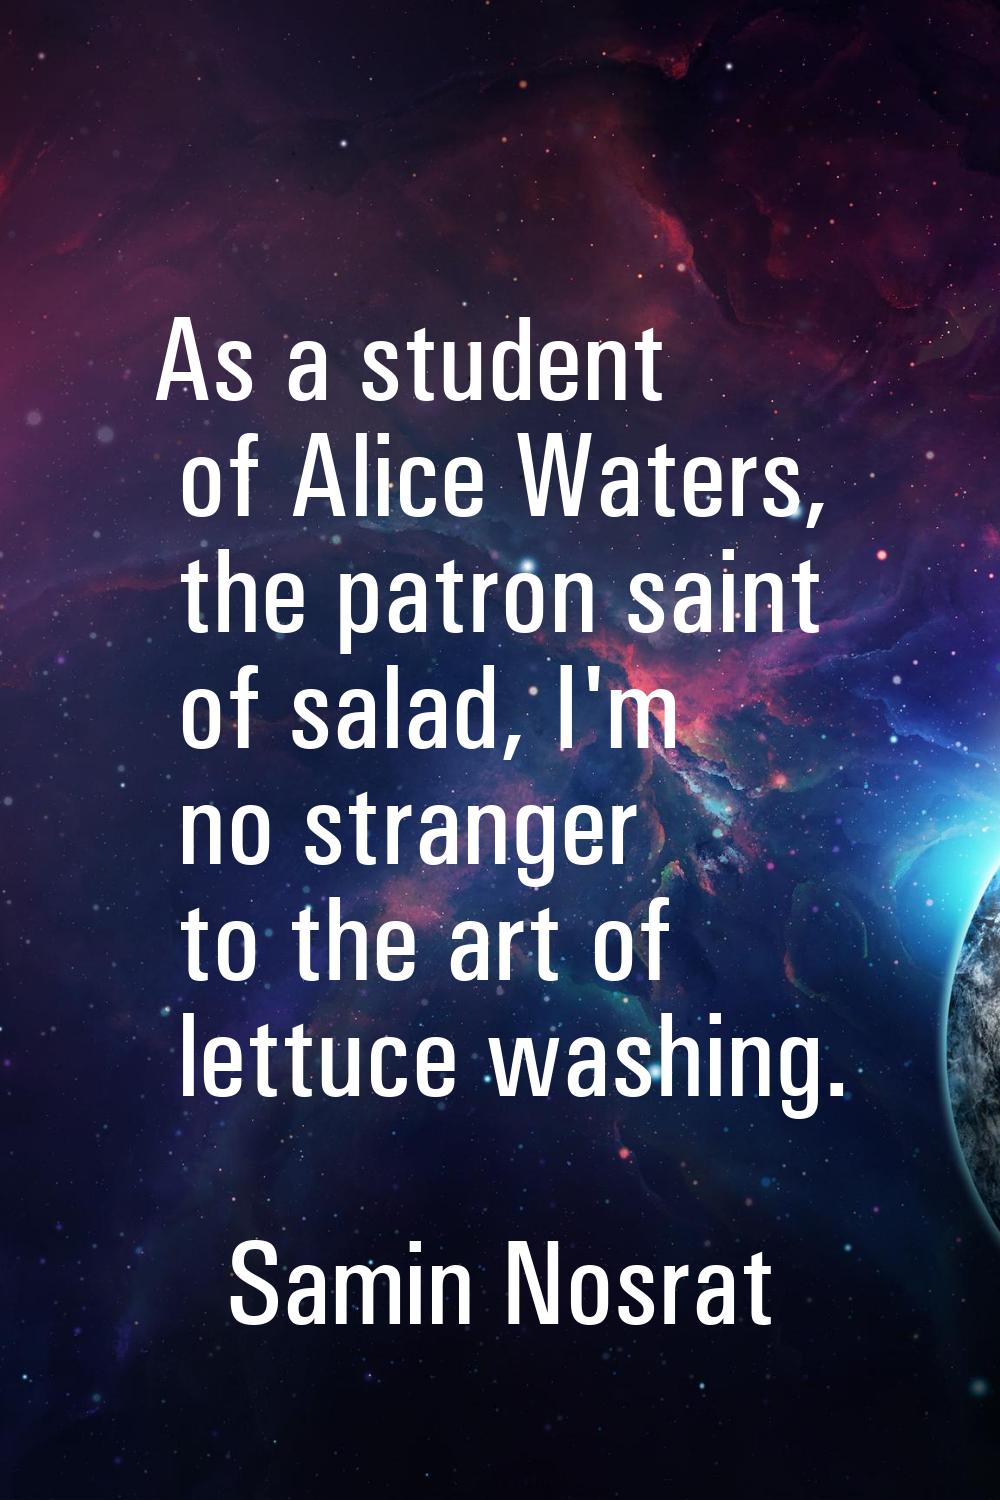 As a student of Alice Waters, the patron saint of salad, I'm no stranger to the art of lettuce wash